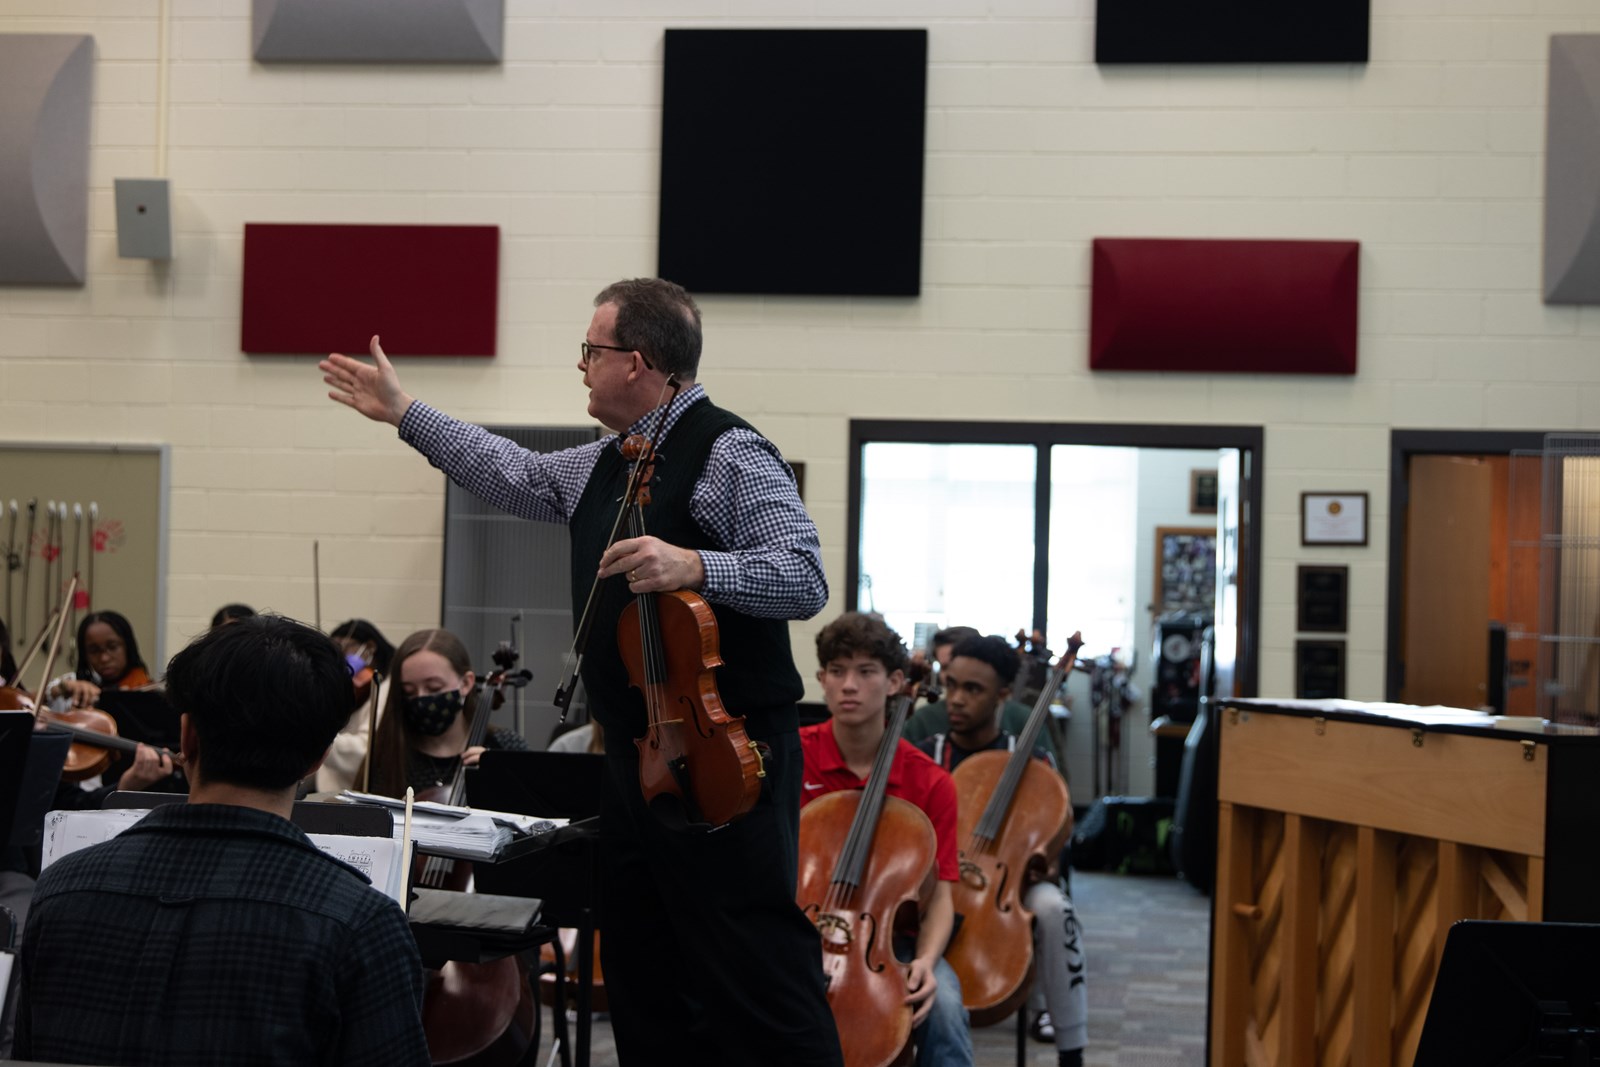 Allatoona%20High%20School%20students%20participate%20in%20James%20Palmer's%20orchestra%20class-36.jpg